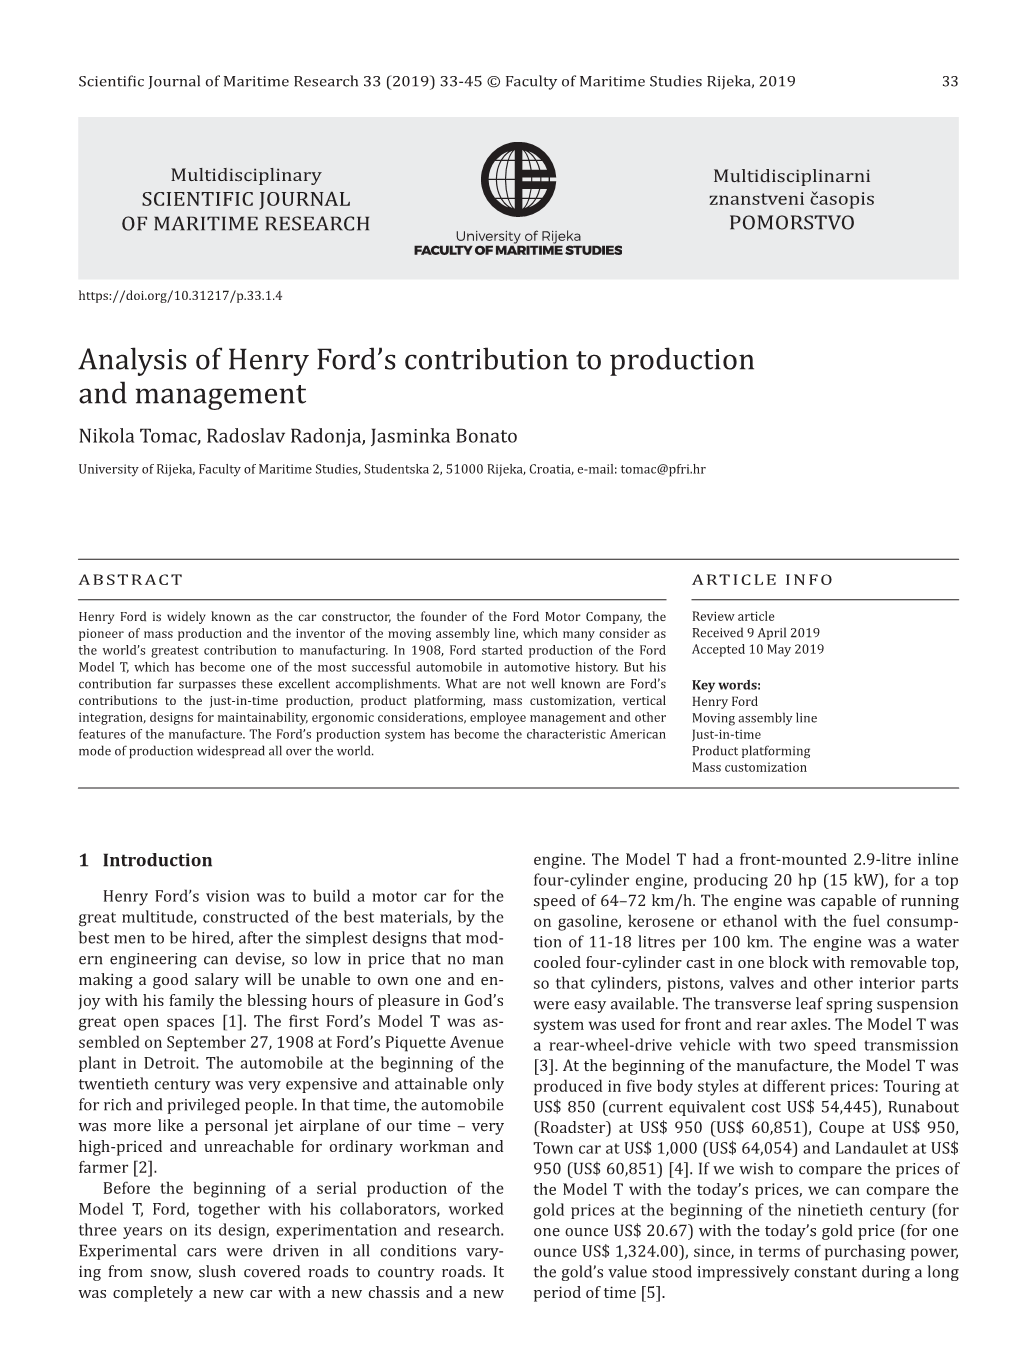 Analysis of Henry Ford's Contribution to Production and Management